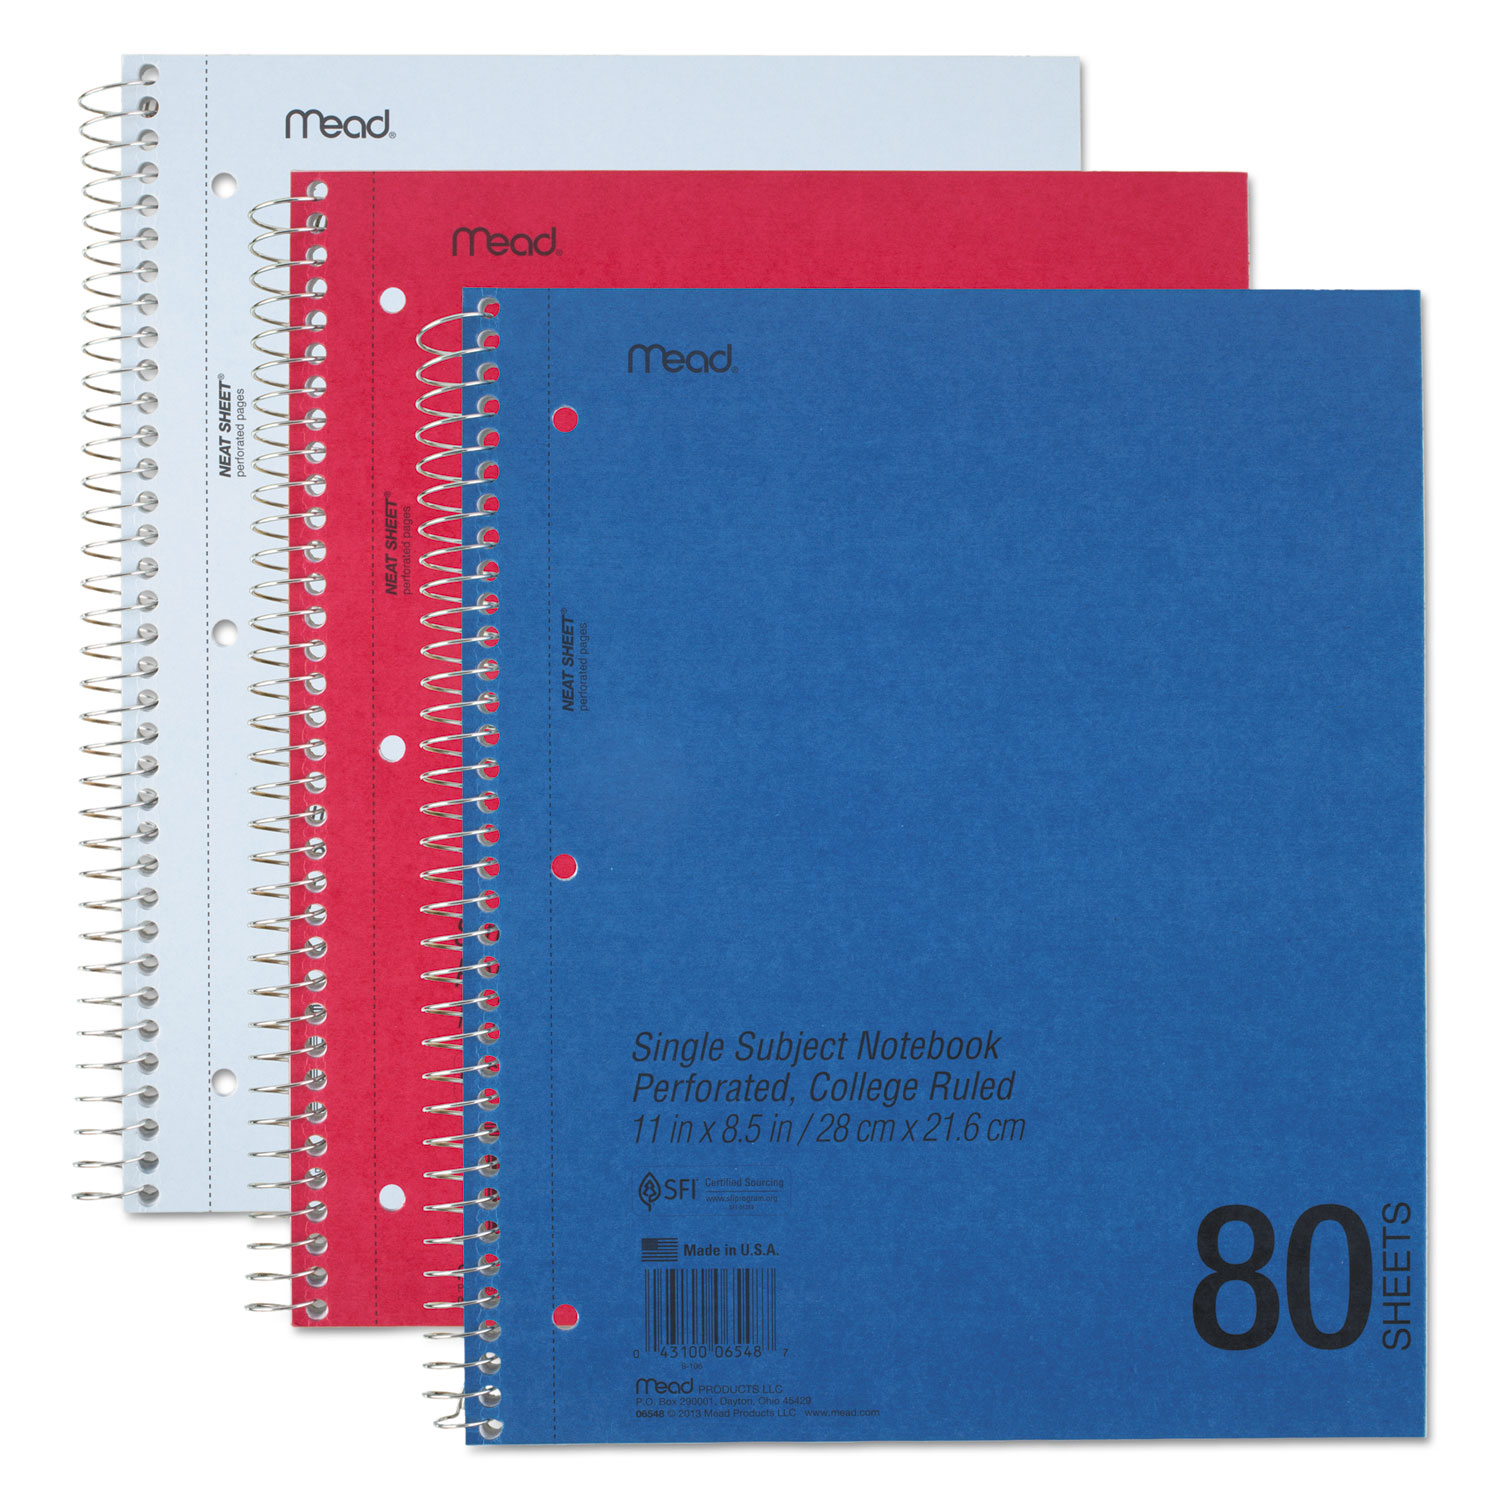  Mead 06548 DuraPress Cover Notebook, 1 Subject, Medium/College Rule, Assorted Color Covers, 11 x 8.5, 80 Sheets (MEA06548) 